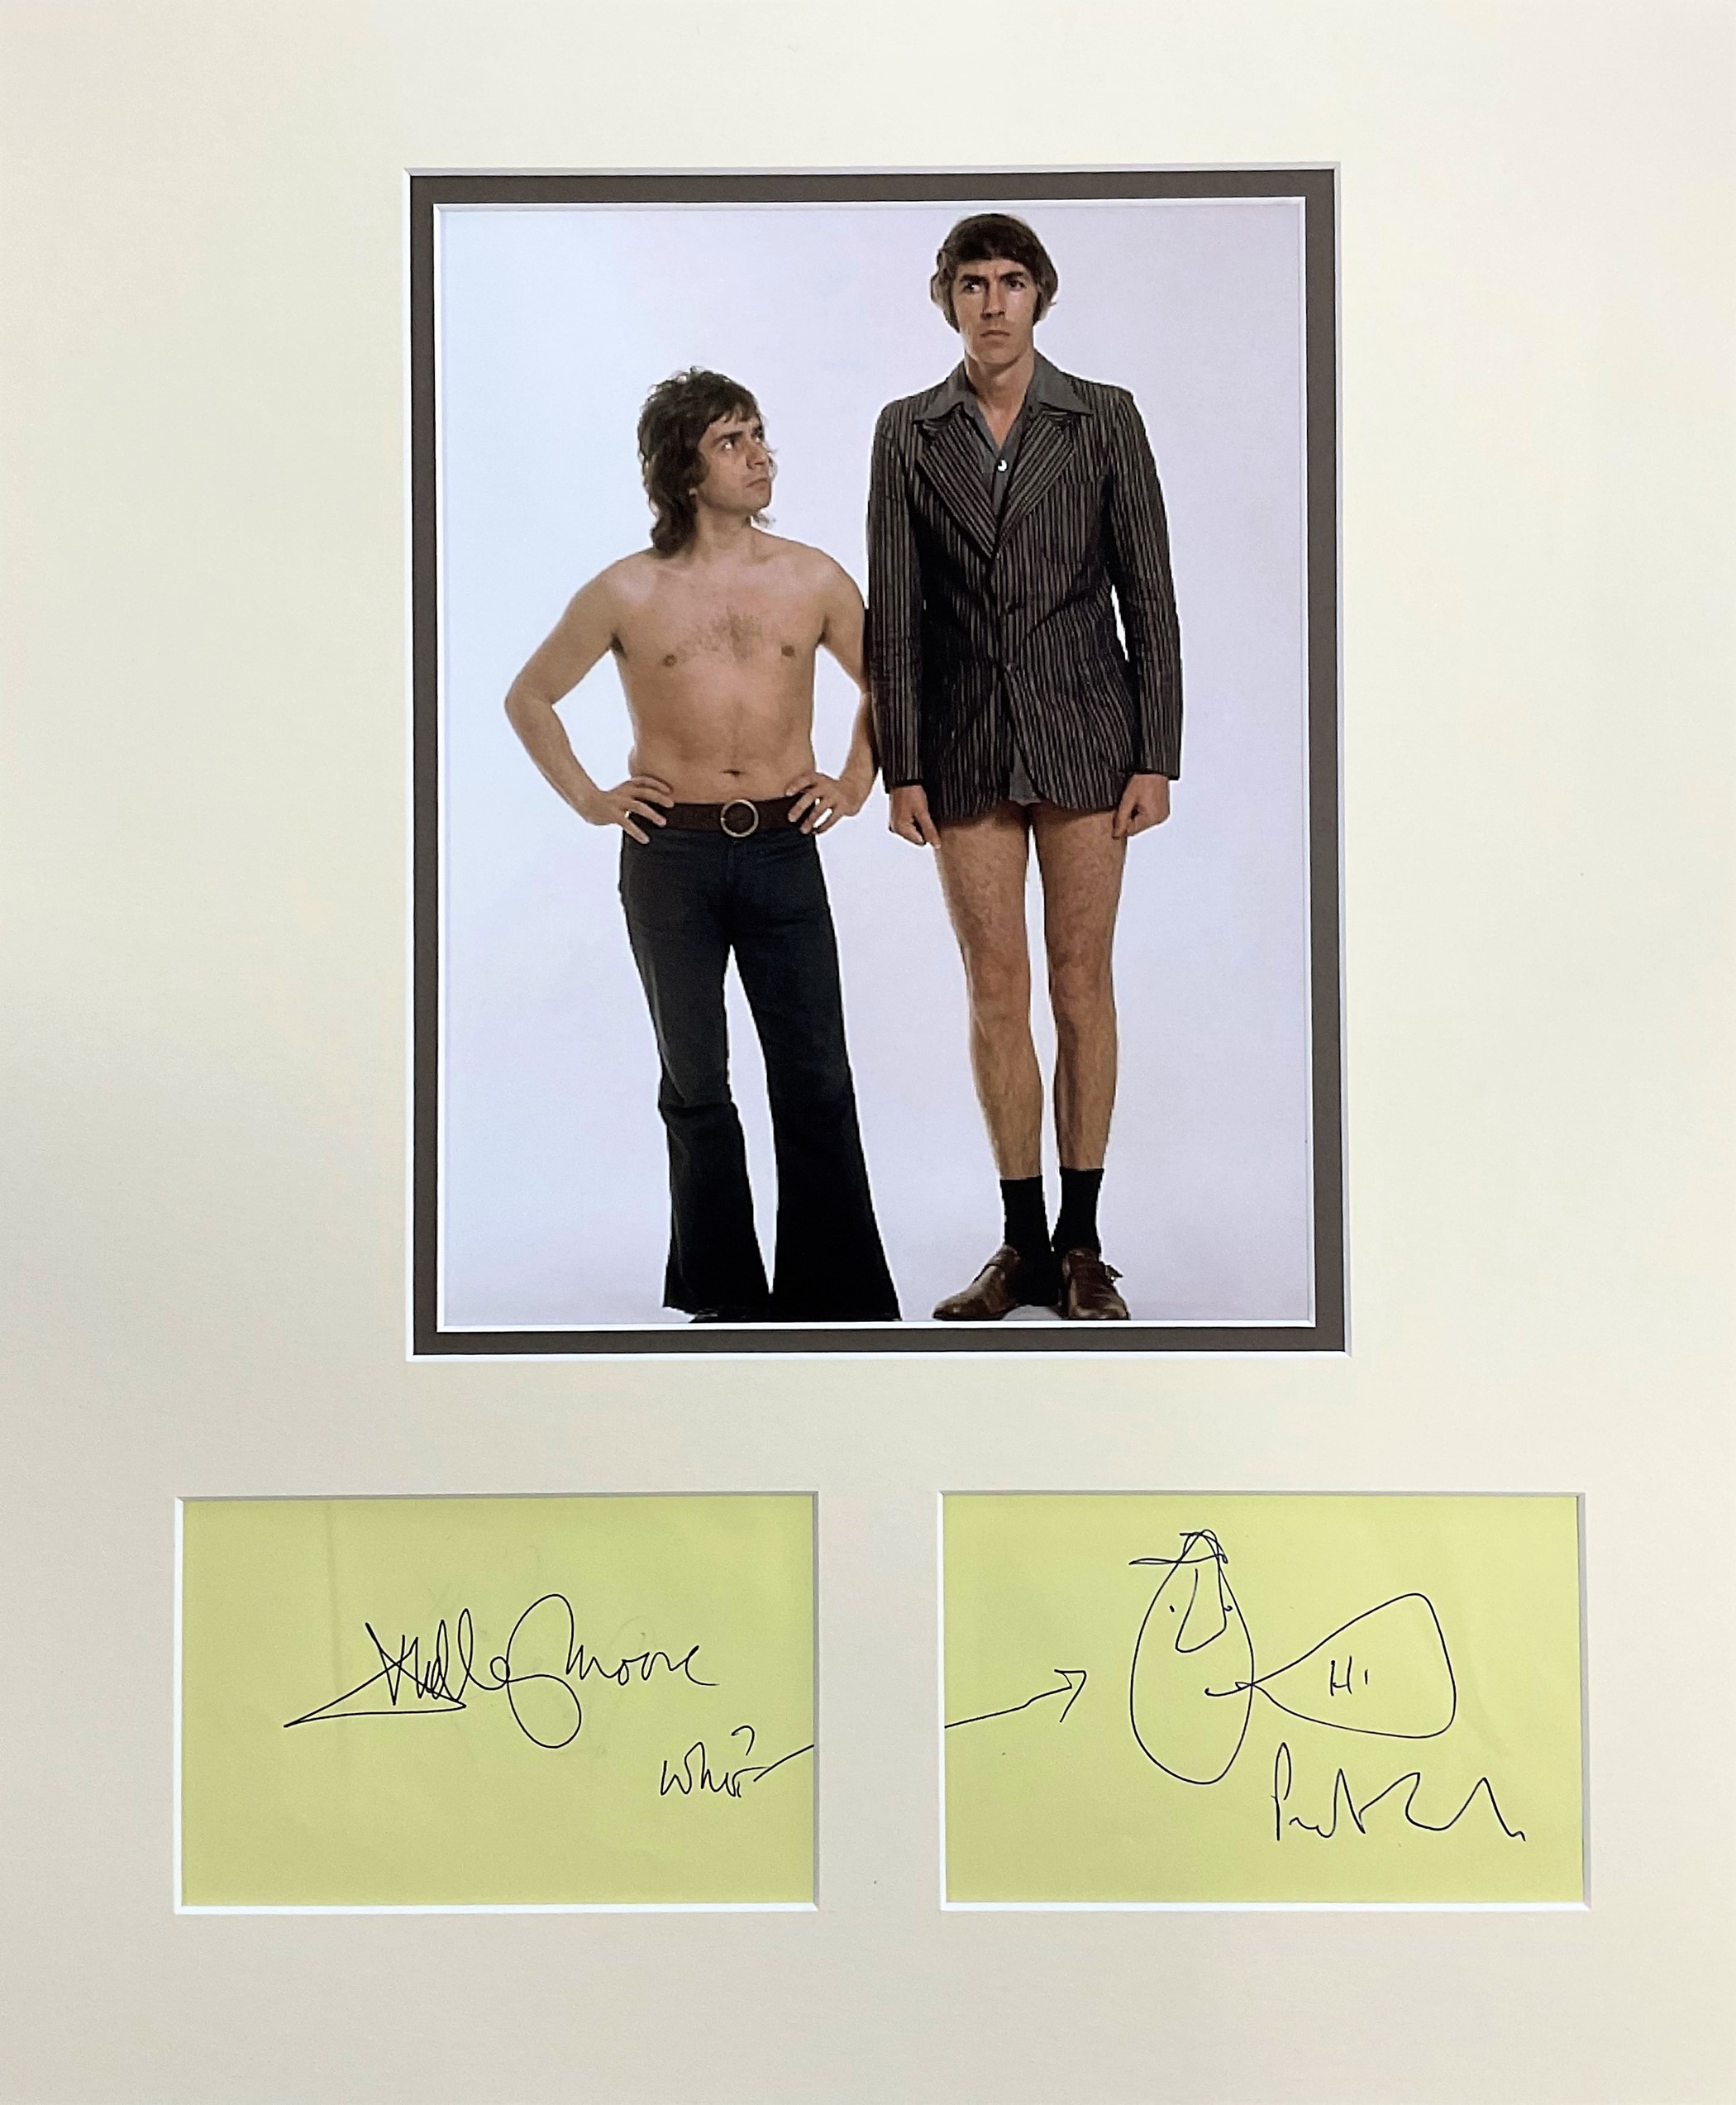 Peter Cook, 1937-2005, And Dudley Moore, 1935-2002, Comedy Act 16x19 Mounted Album Pages Signed By